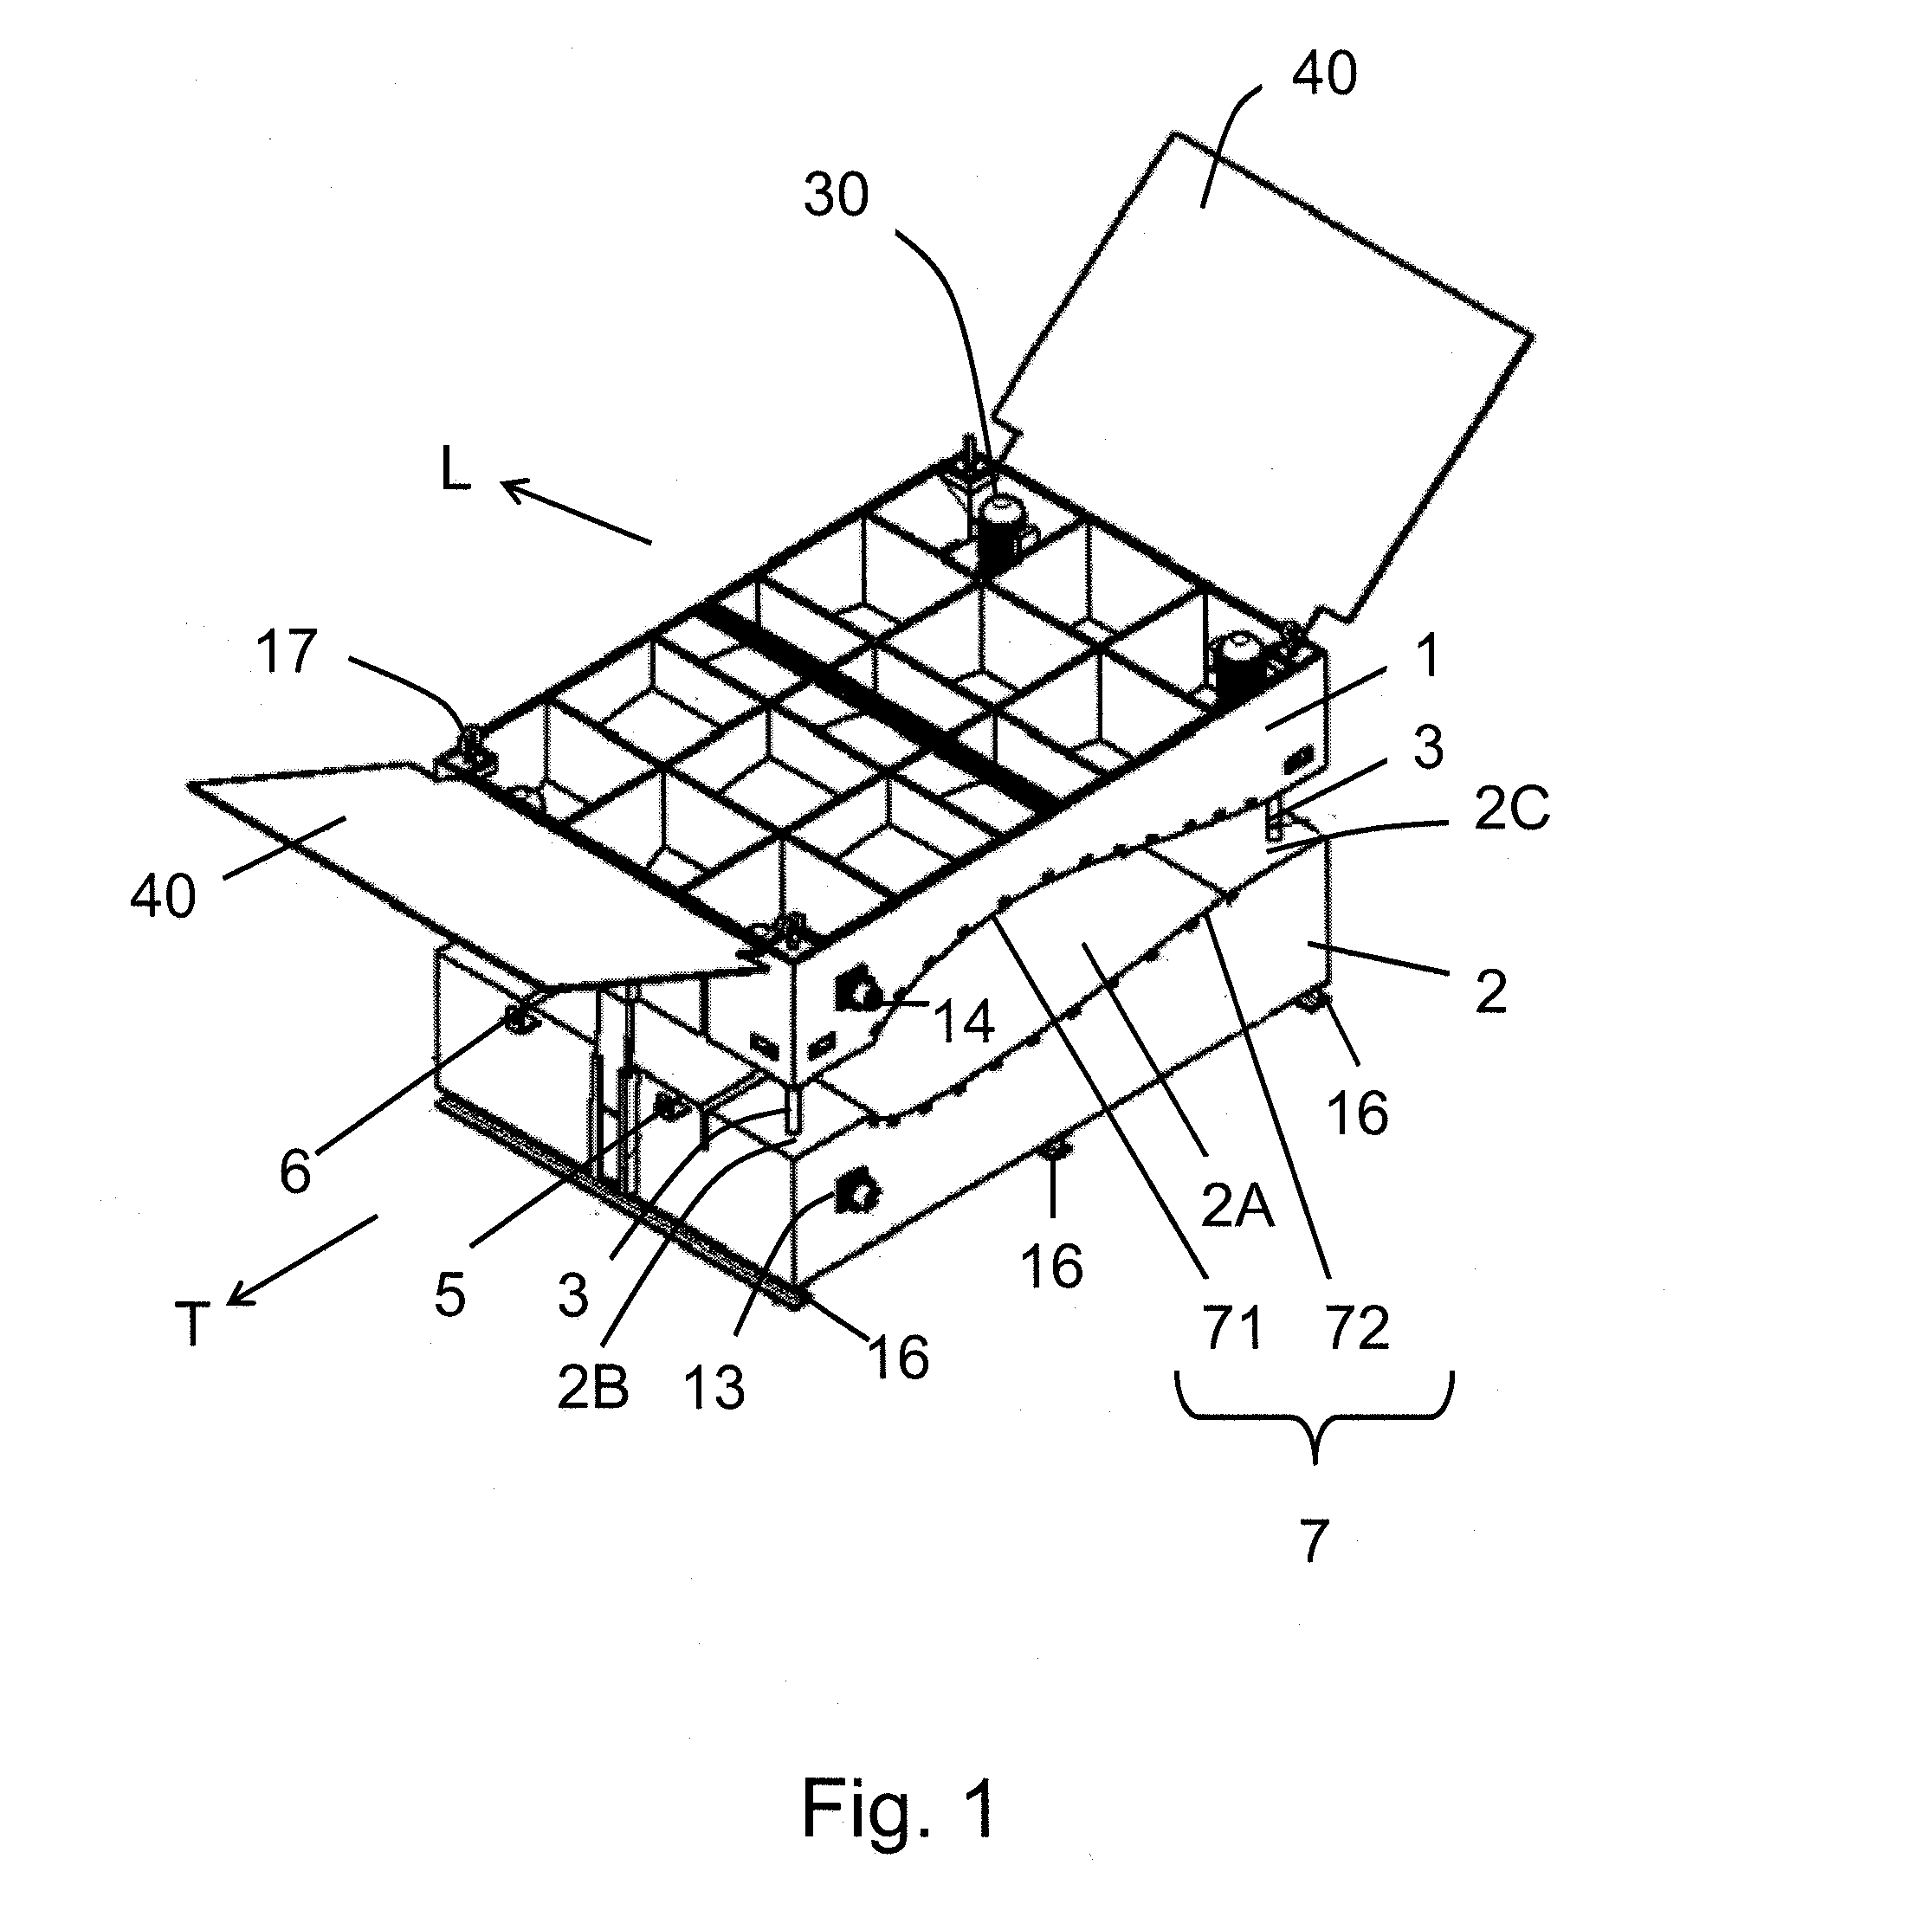 Apparatus for assembling blade sections